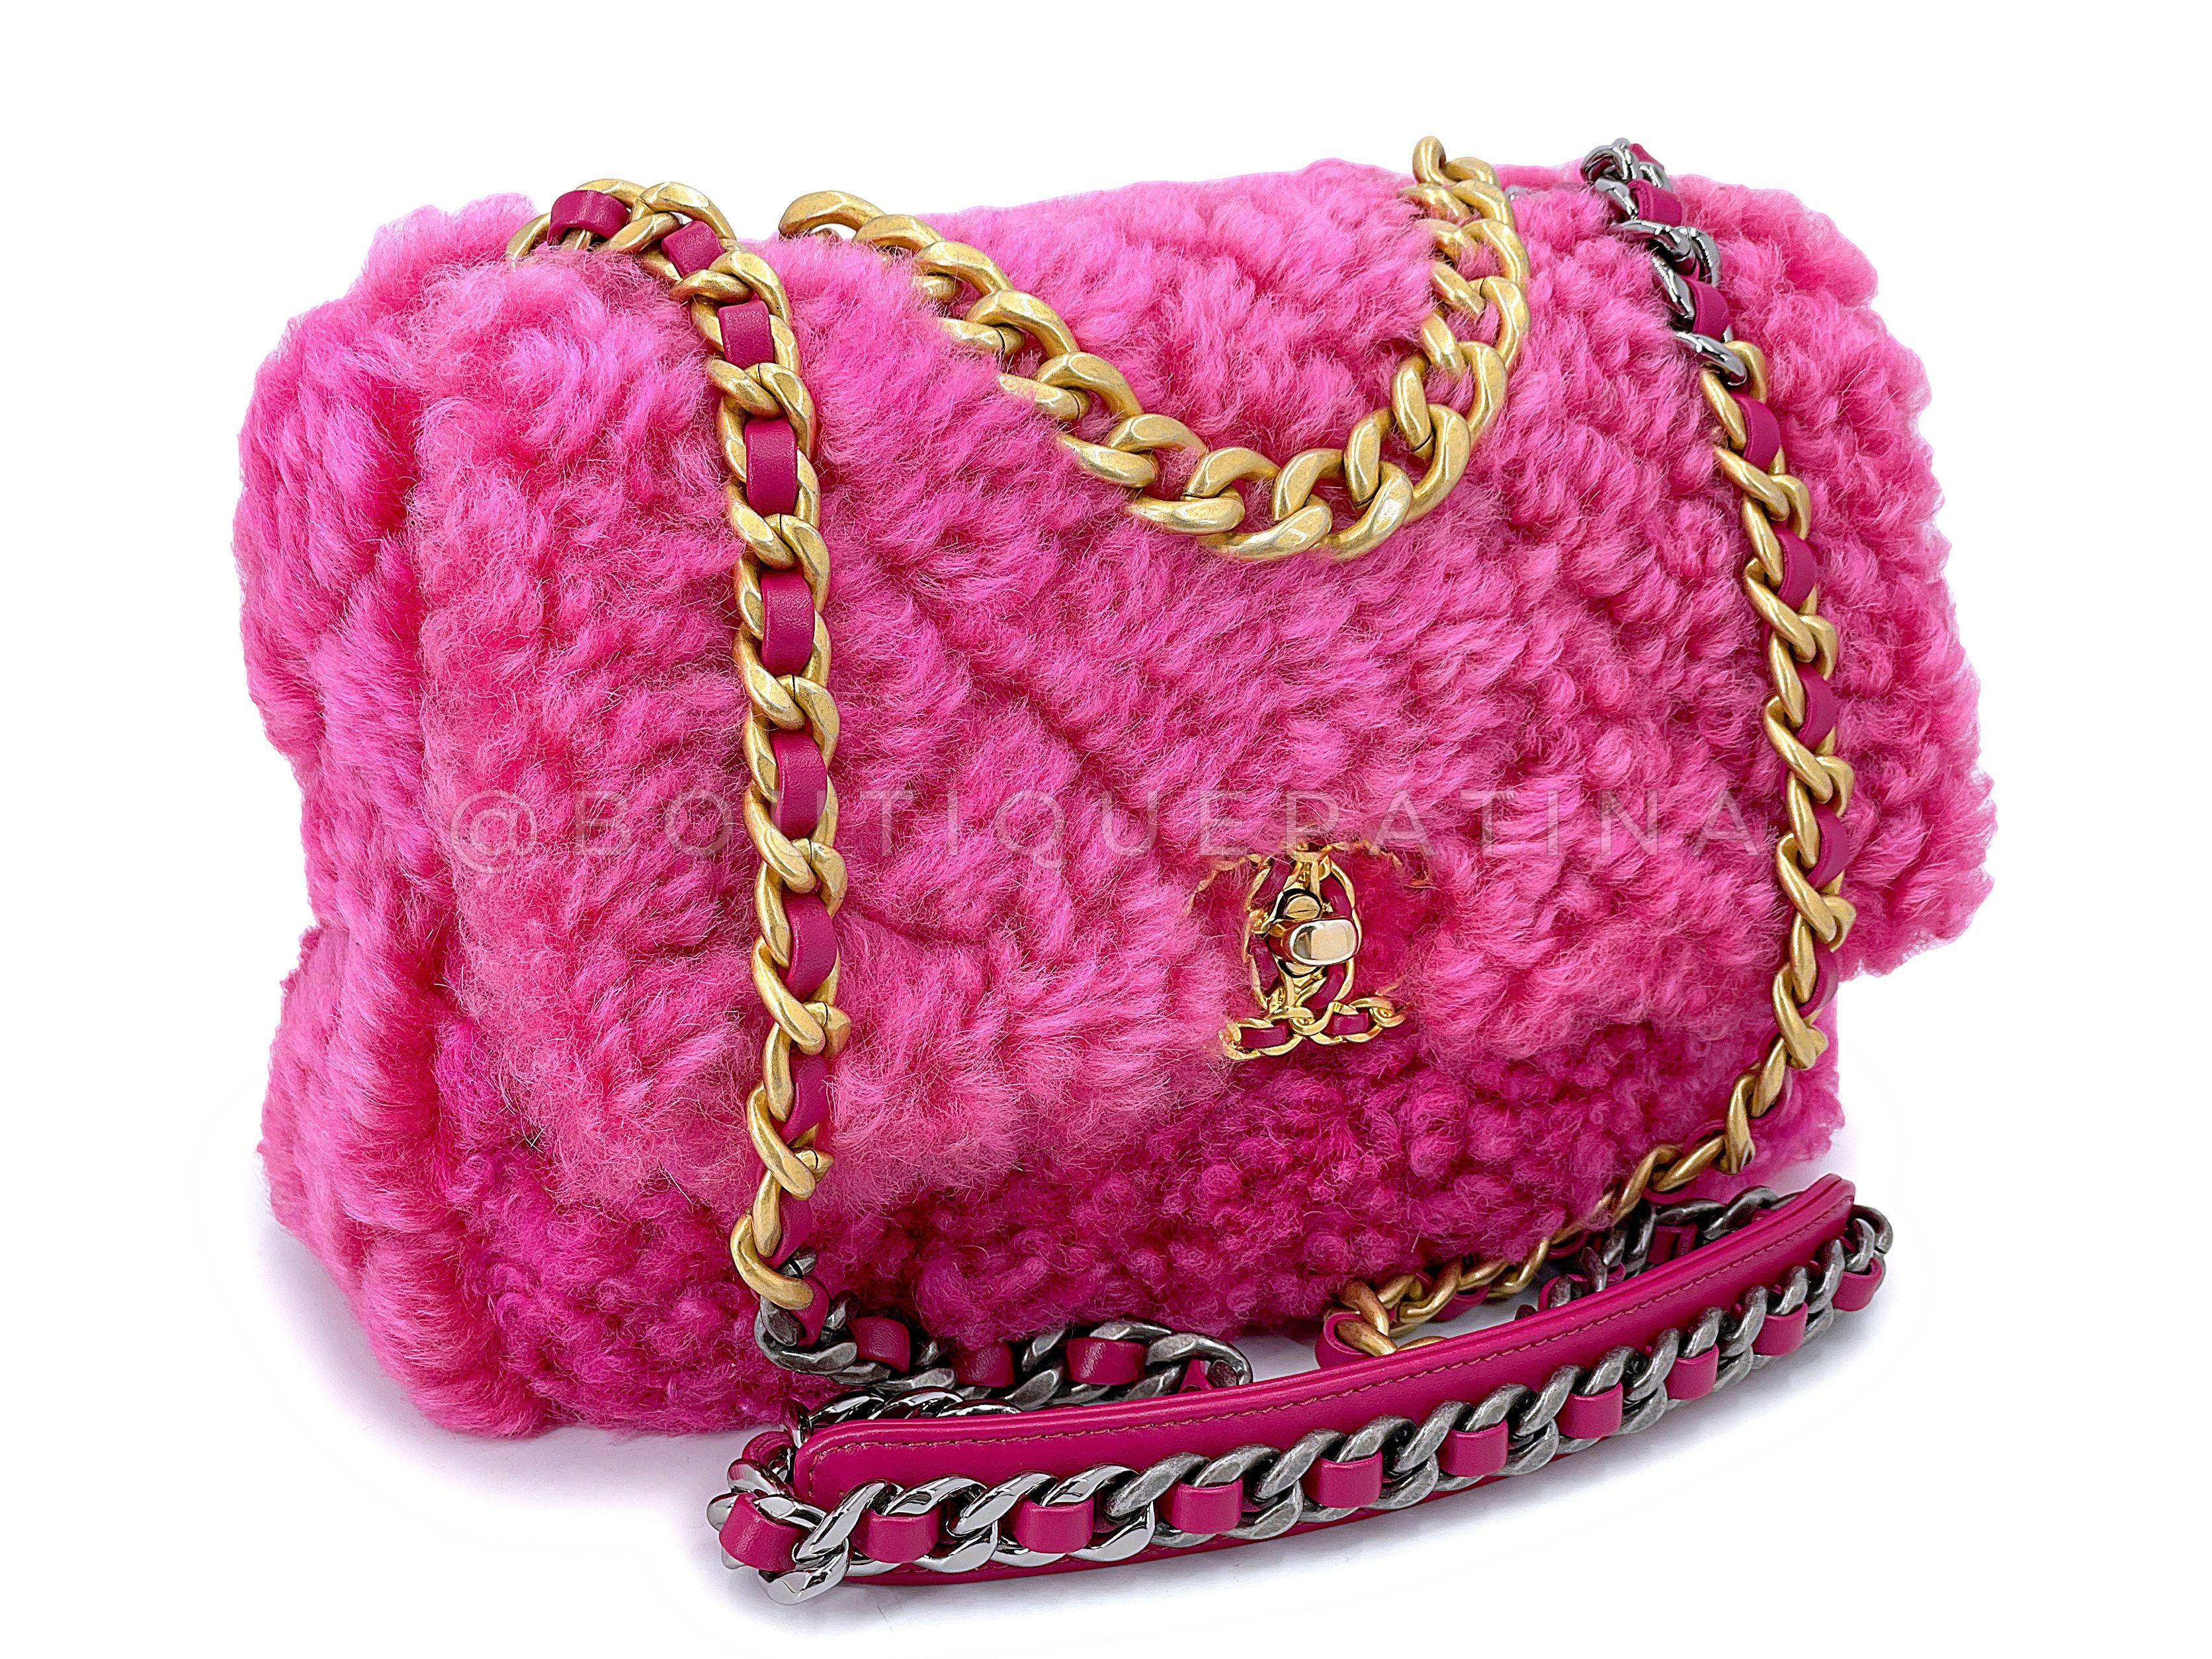 Store item: 67786
This Chanel 19 Pink Shearling Fur Small Medium Flap Bag is super whimsical and yummy with a fuchsia pink shearling fur that is cozy and chic at the same time. 

The Chanel 19 ligne is a relatively new timeless look released from